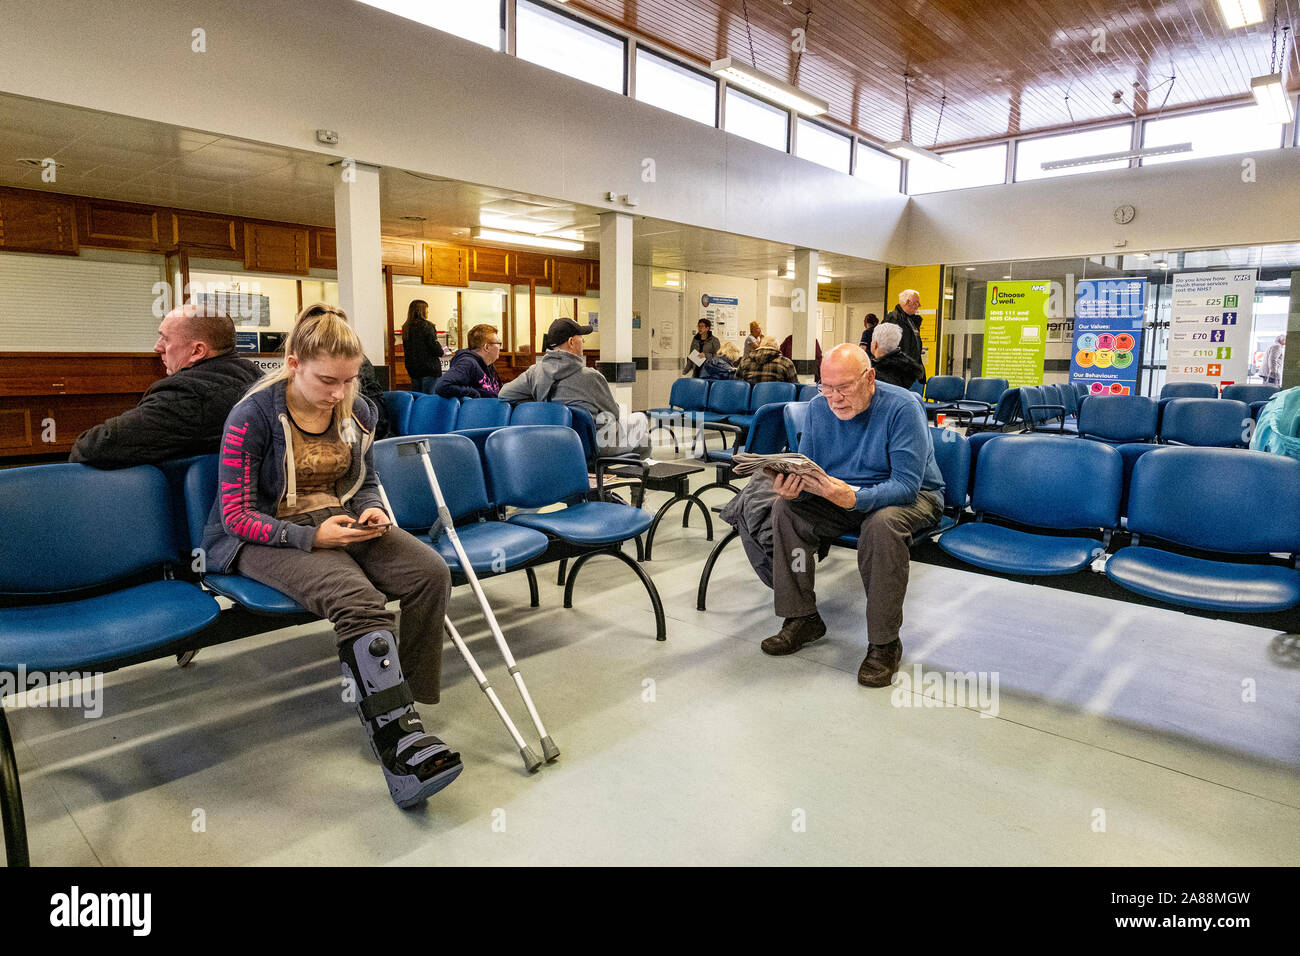 Reception area in NHS hospital or doctor's waiting room with patient's Stock Photo